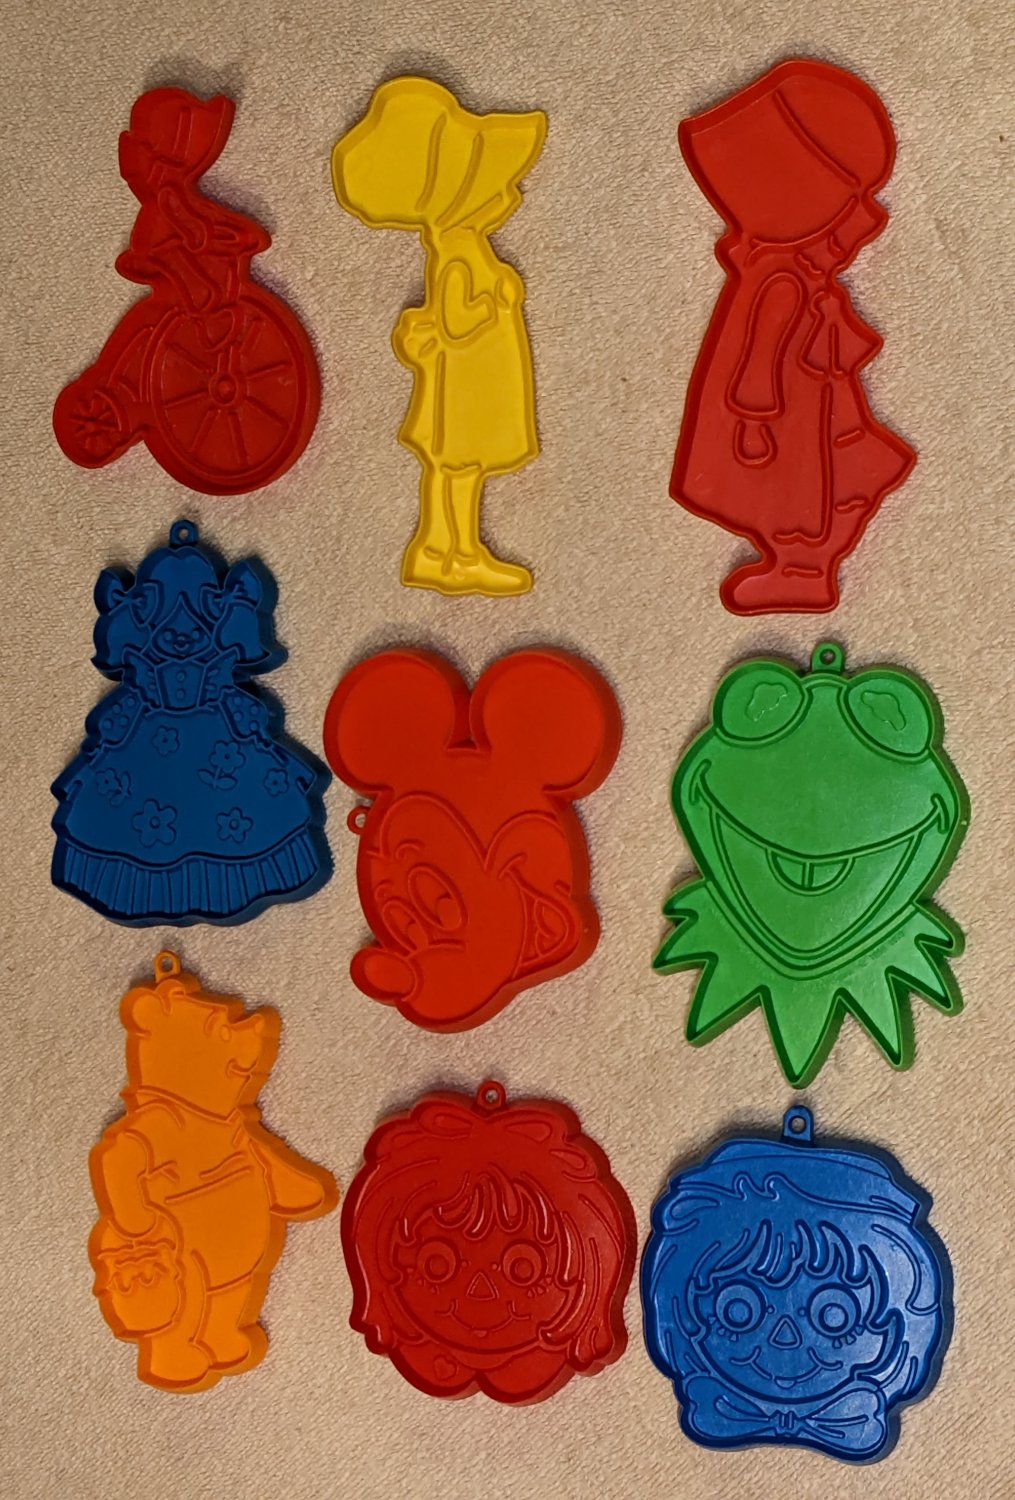 Character Cookie Cutter Lot Kermit Frog Mickey Mouse Winnie the Pooh Raggedy Ann Andy Holly Hobbie